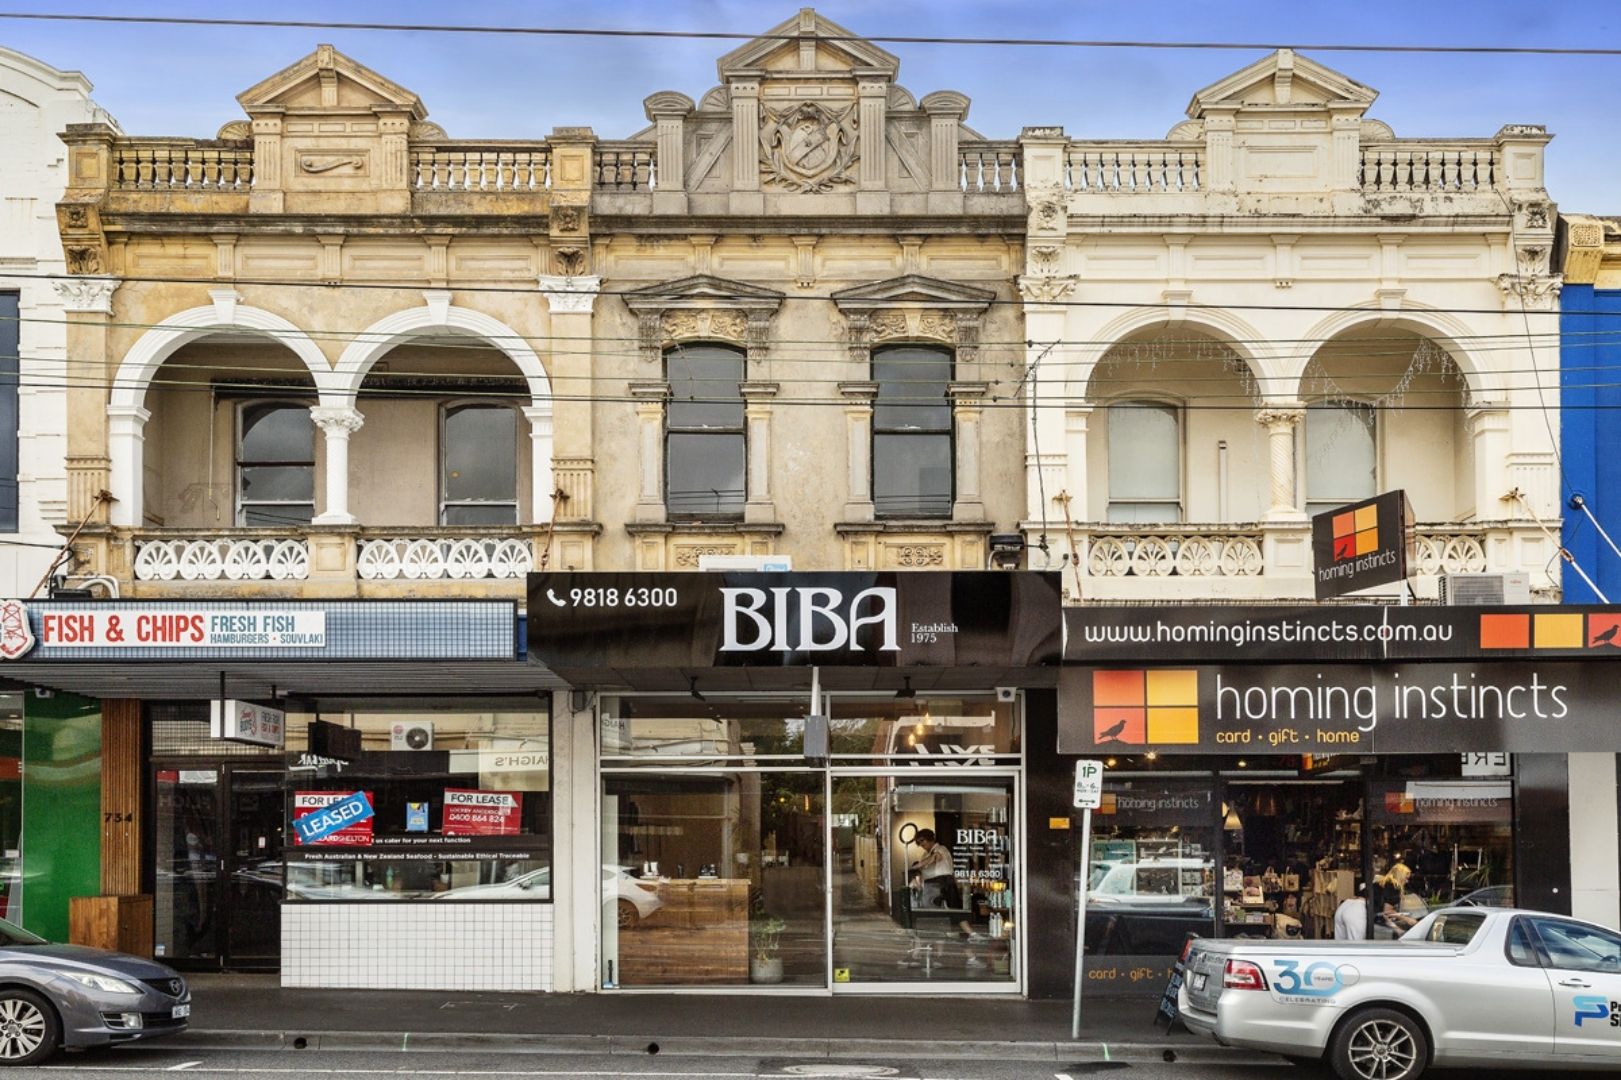 Exterior shot of the Homing Instincts shop on Glenferrie Rd Hawthorn